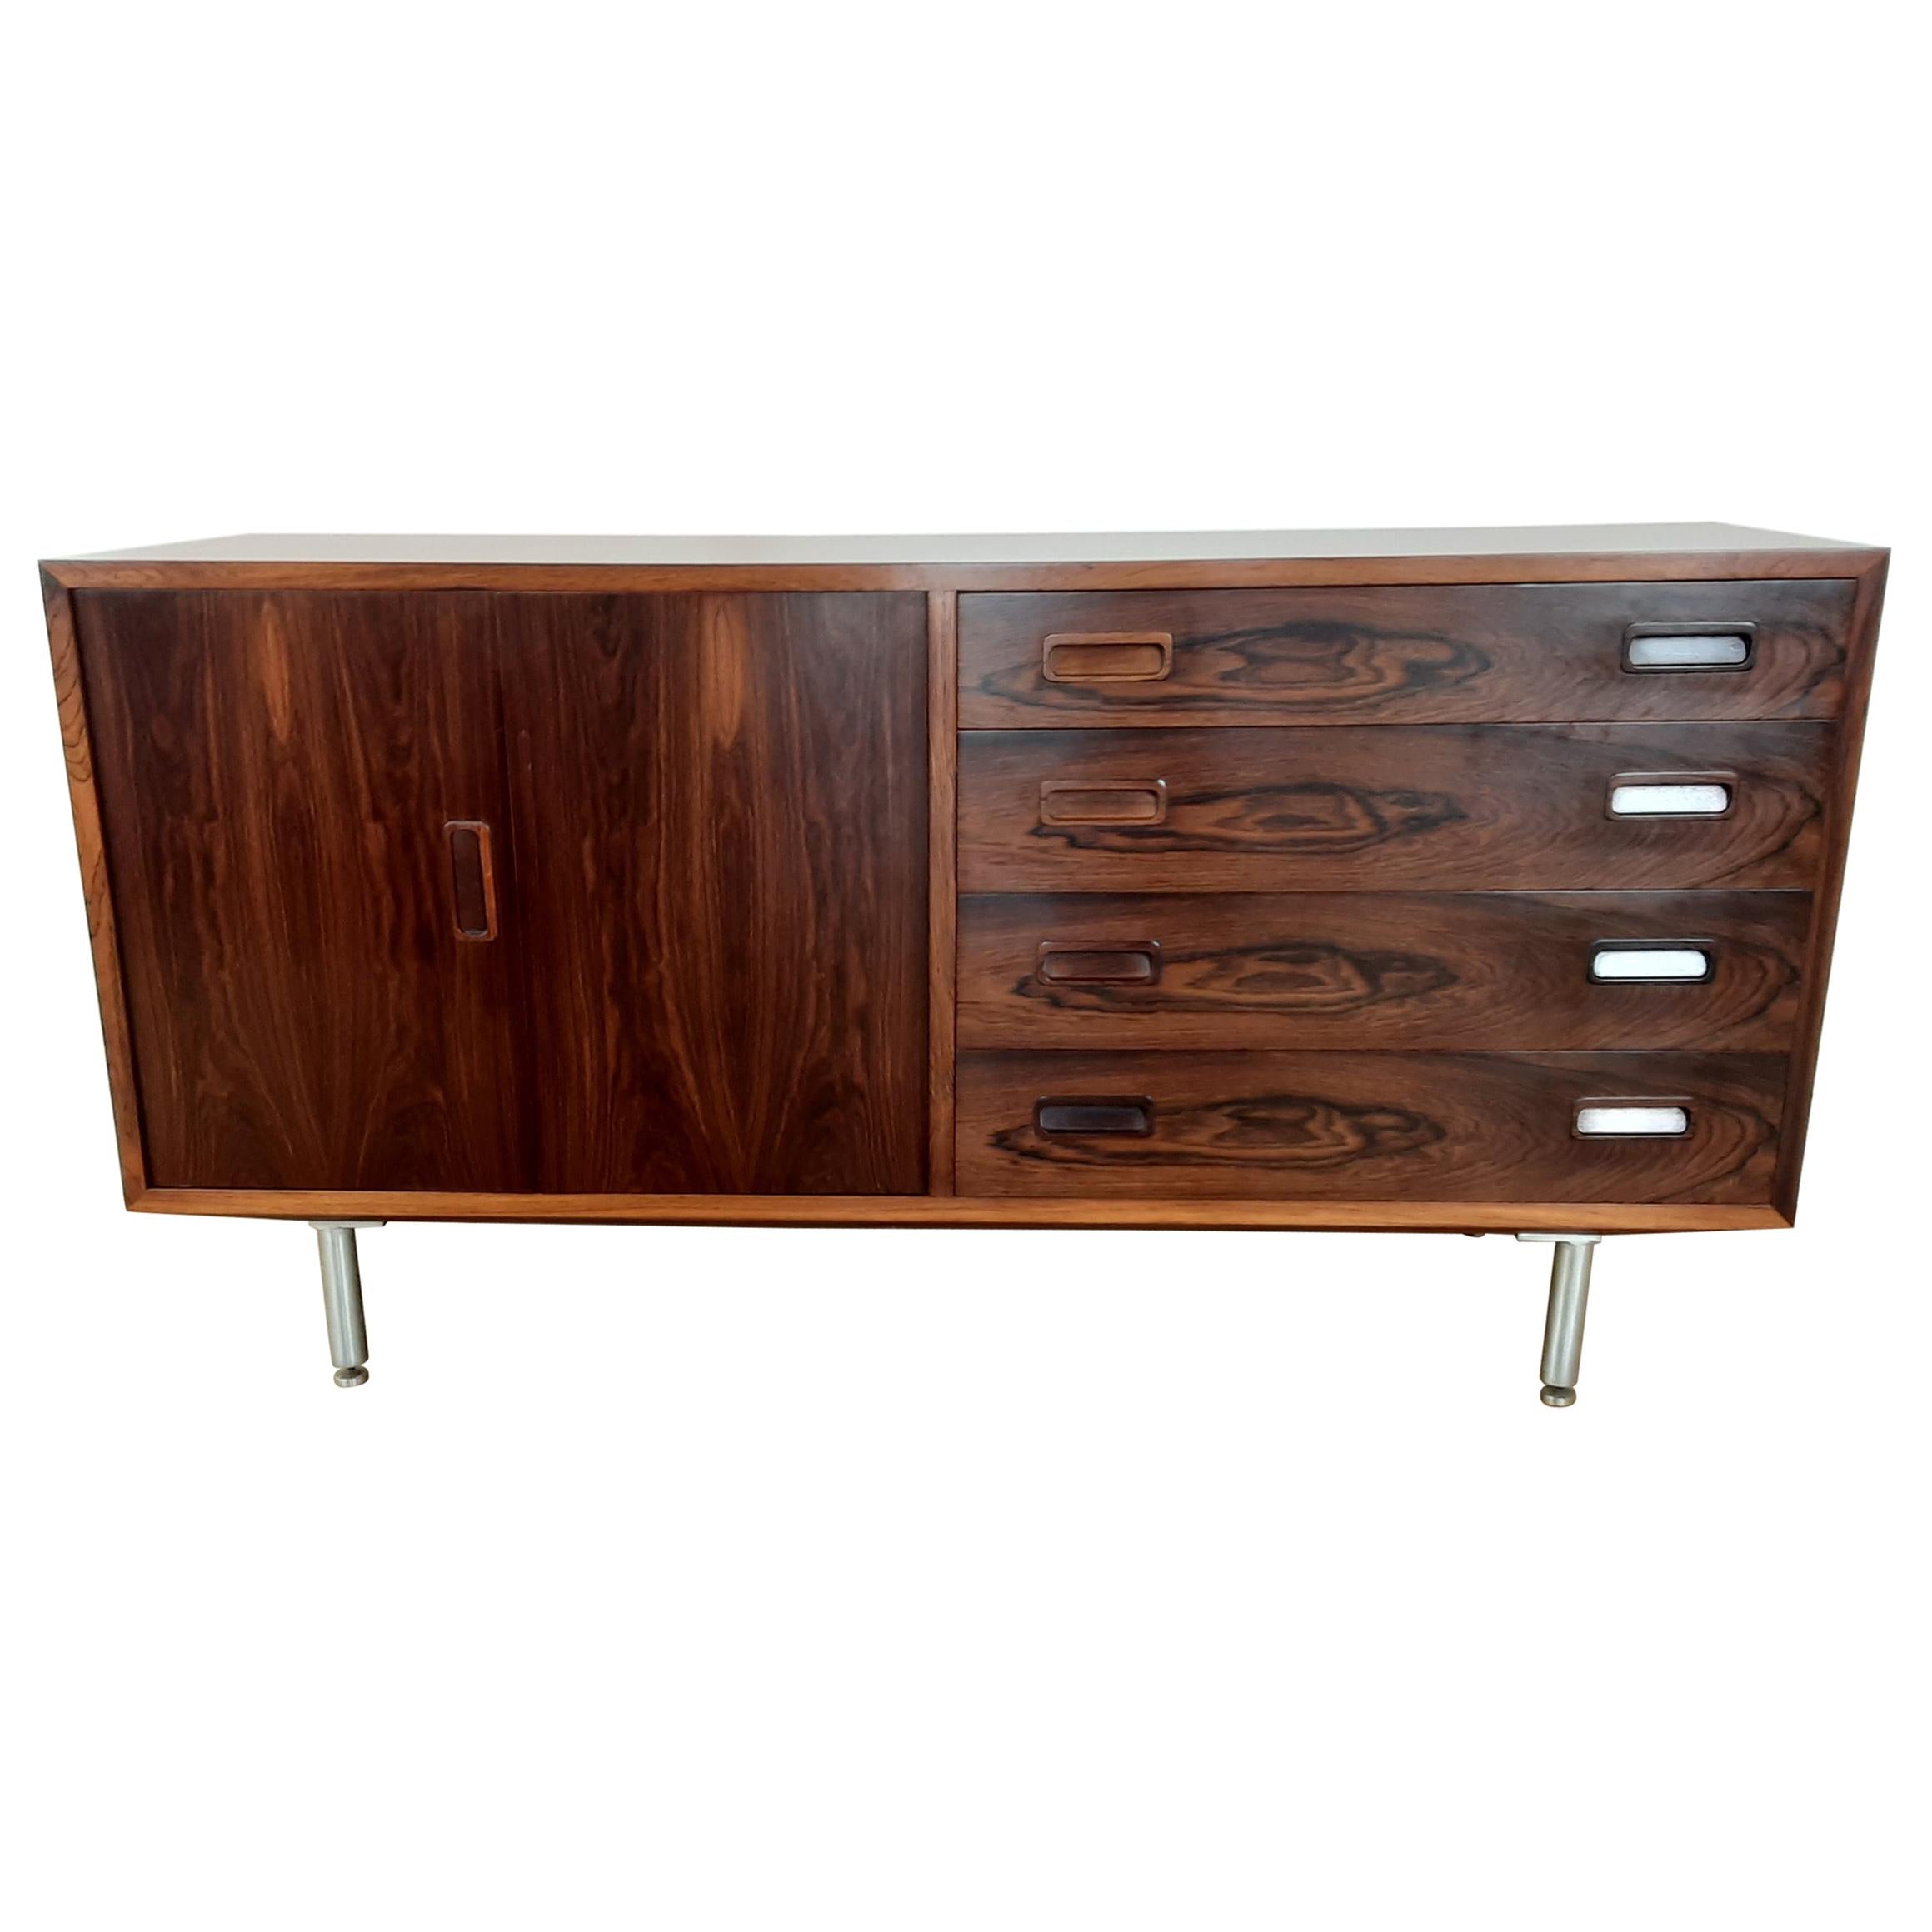 Midcentury Poul Hundevad Rosewood Sideboard with Drawers For Sale